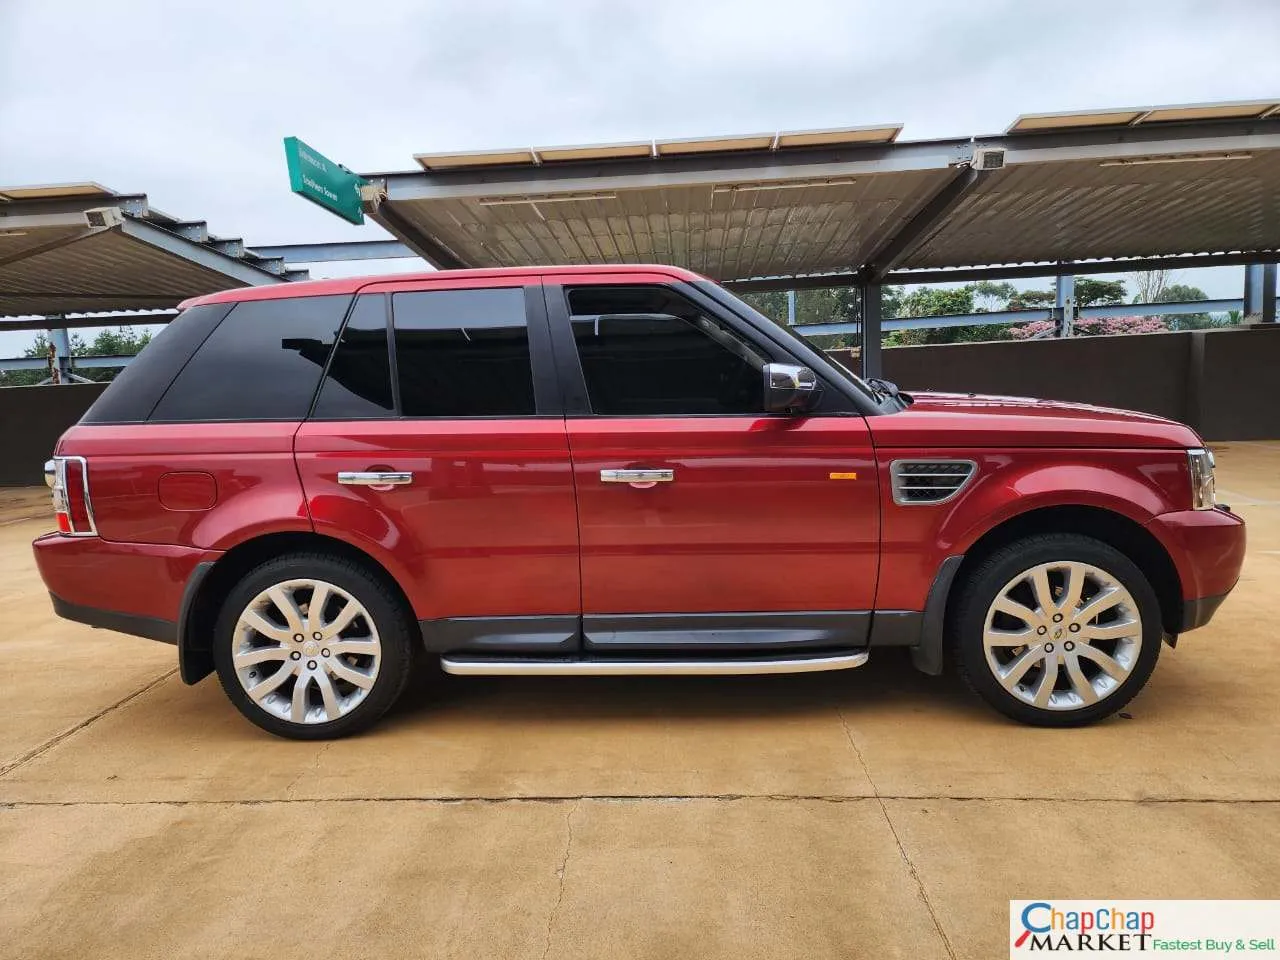 Cars For Sale/Vehicles Cars-Range Rover Sport HSE 🔥 You pay 30% deposit Trade in OK QUICK SALE 1